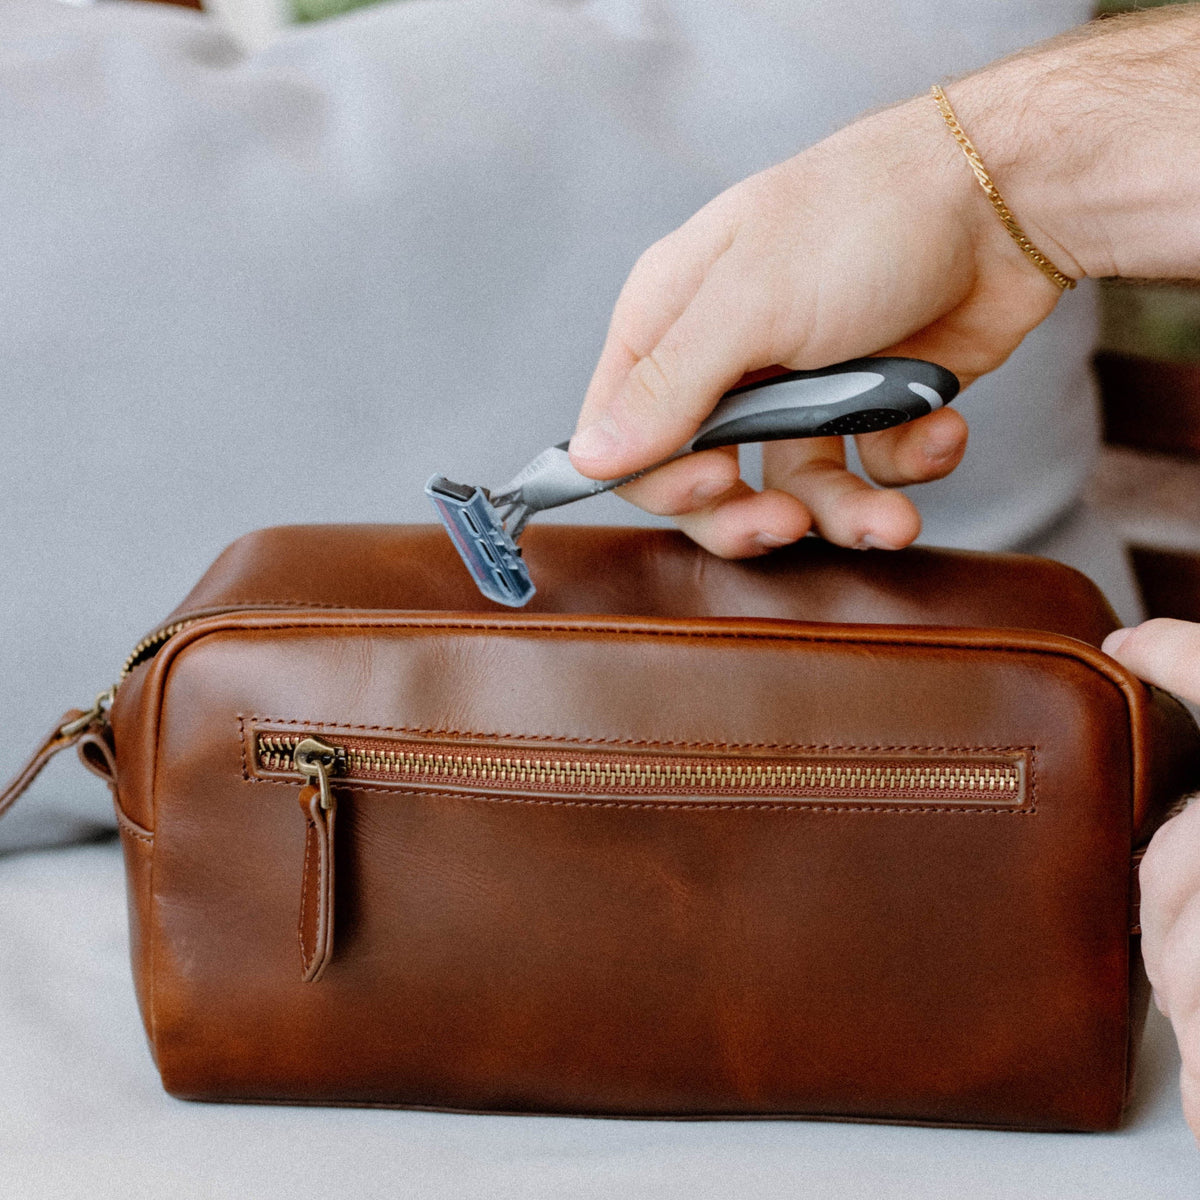 10 Dopp Kits to Travel With in 2018